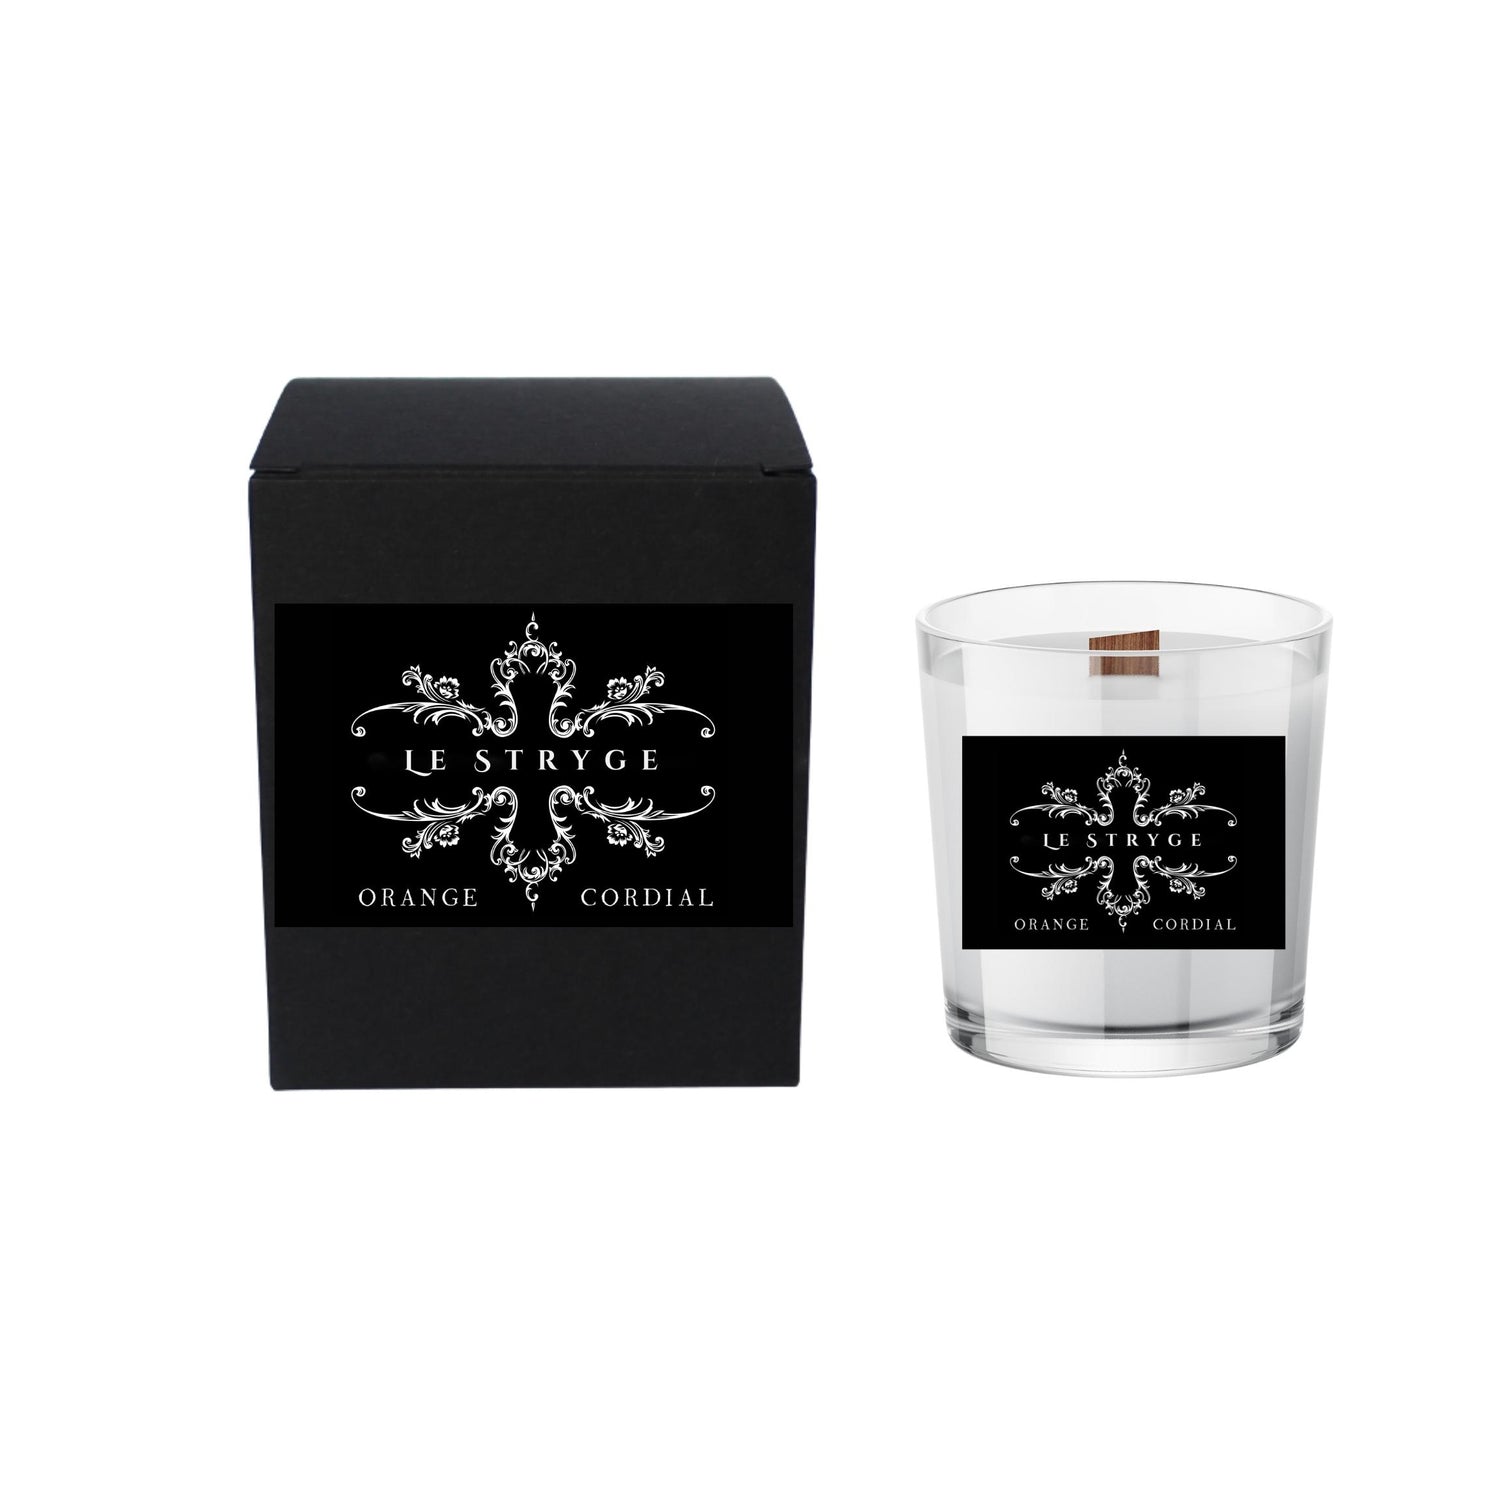 Le Stryge Orange Cordial Candle | Luxury Home Fragrances and Decor